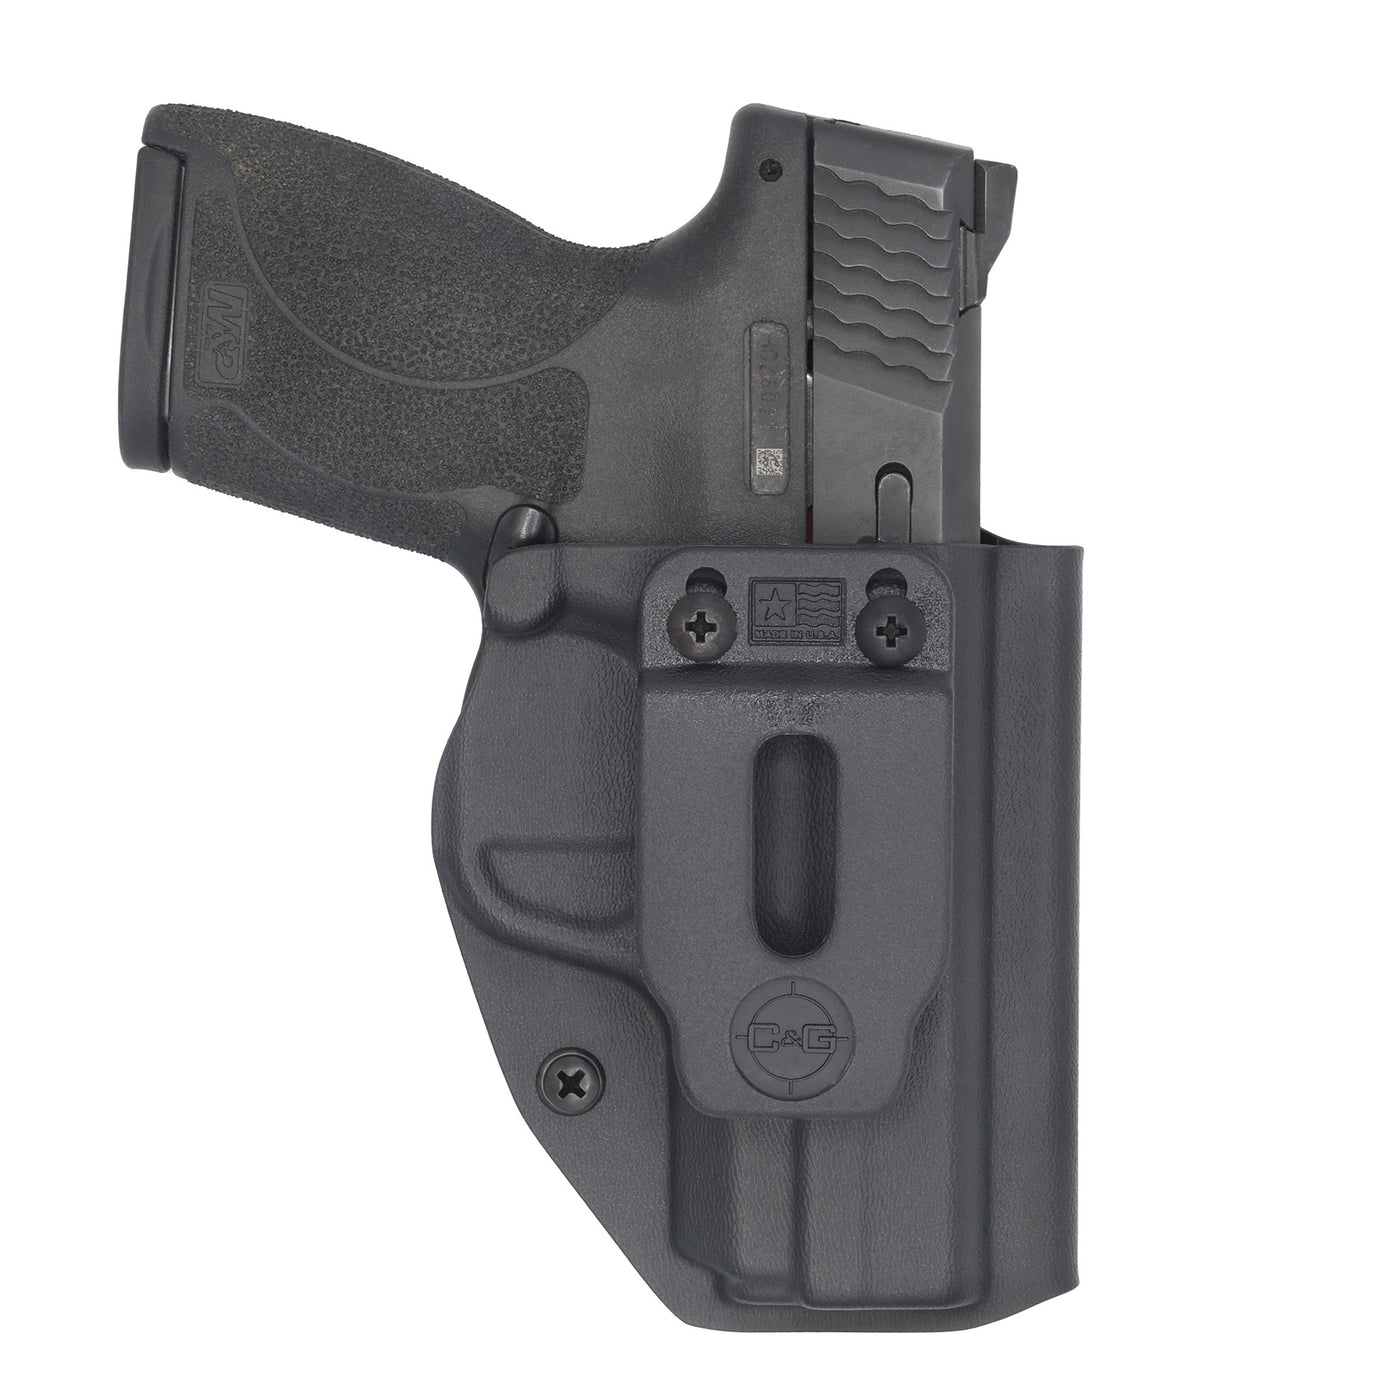 C&G Holsters custom Covert IWB kydex holster for Smith & Wesson M&P Shield 45 in black holstered